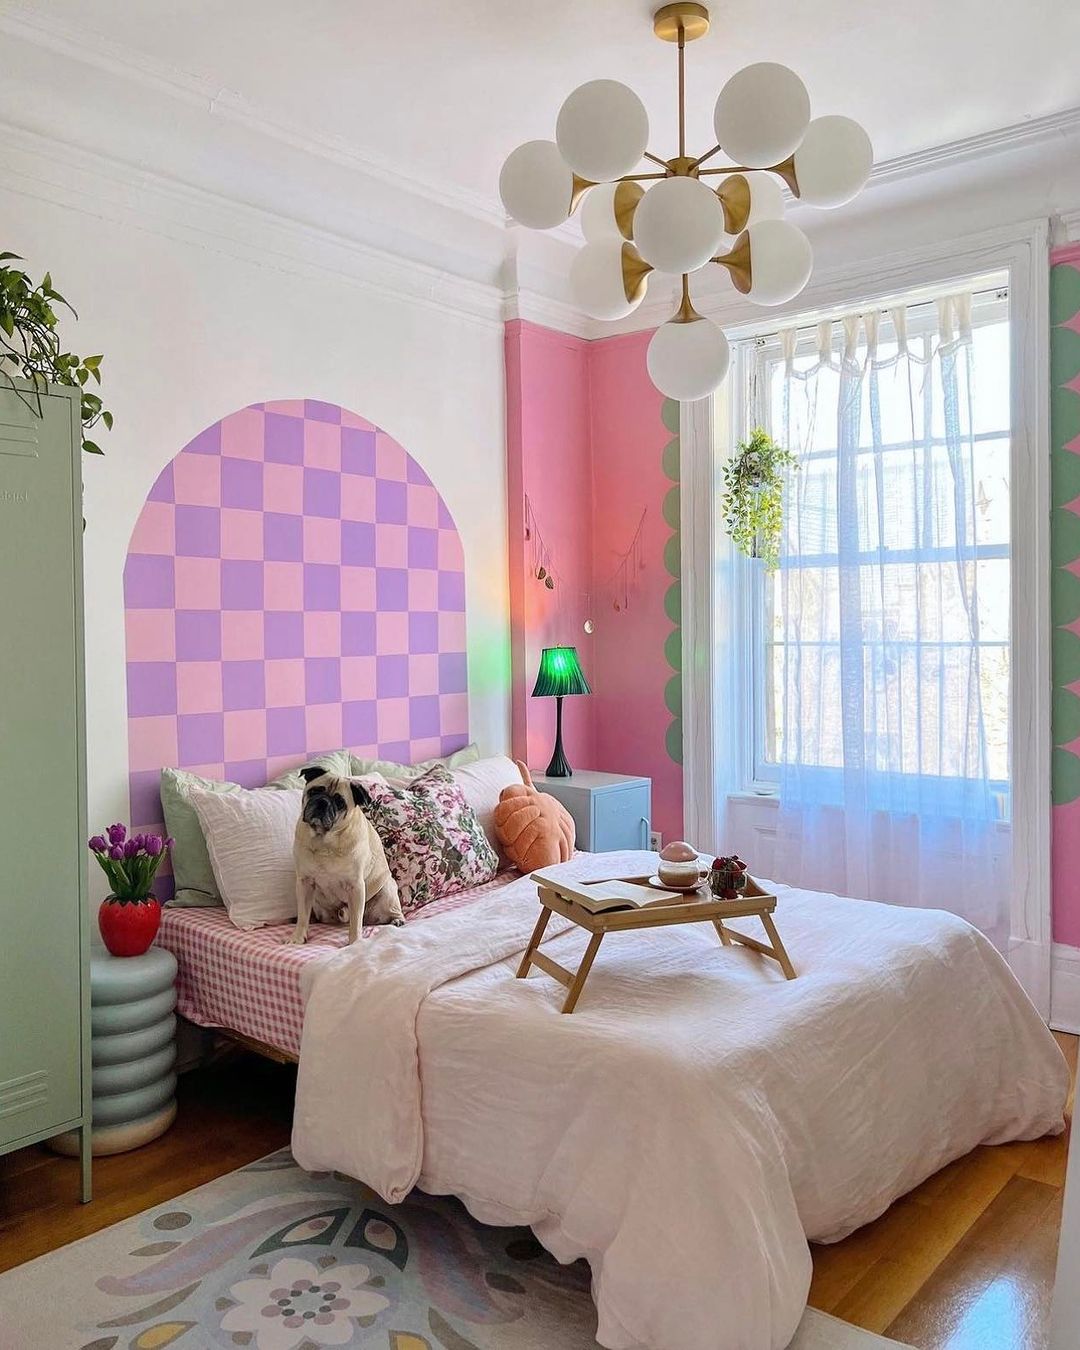 Colorful Aesthetics With Pastel Walls And Layer Area Rug